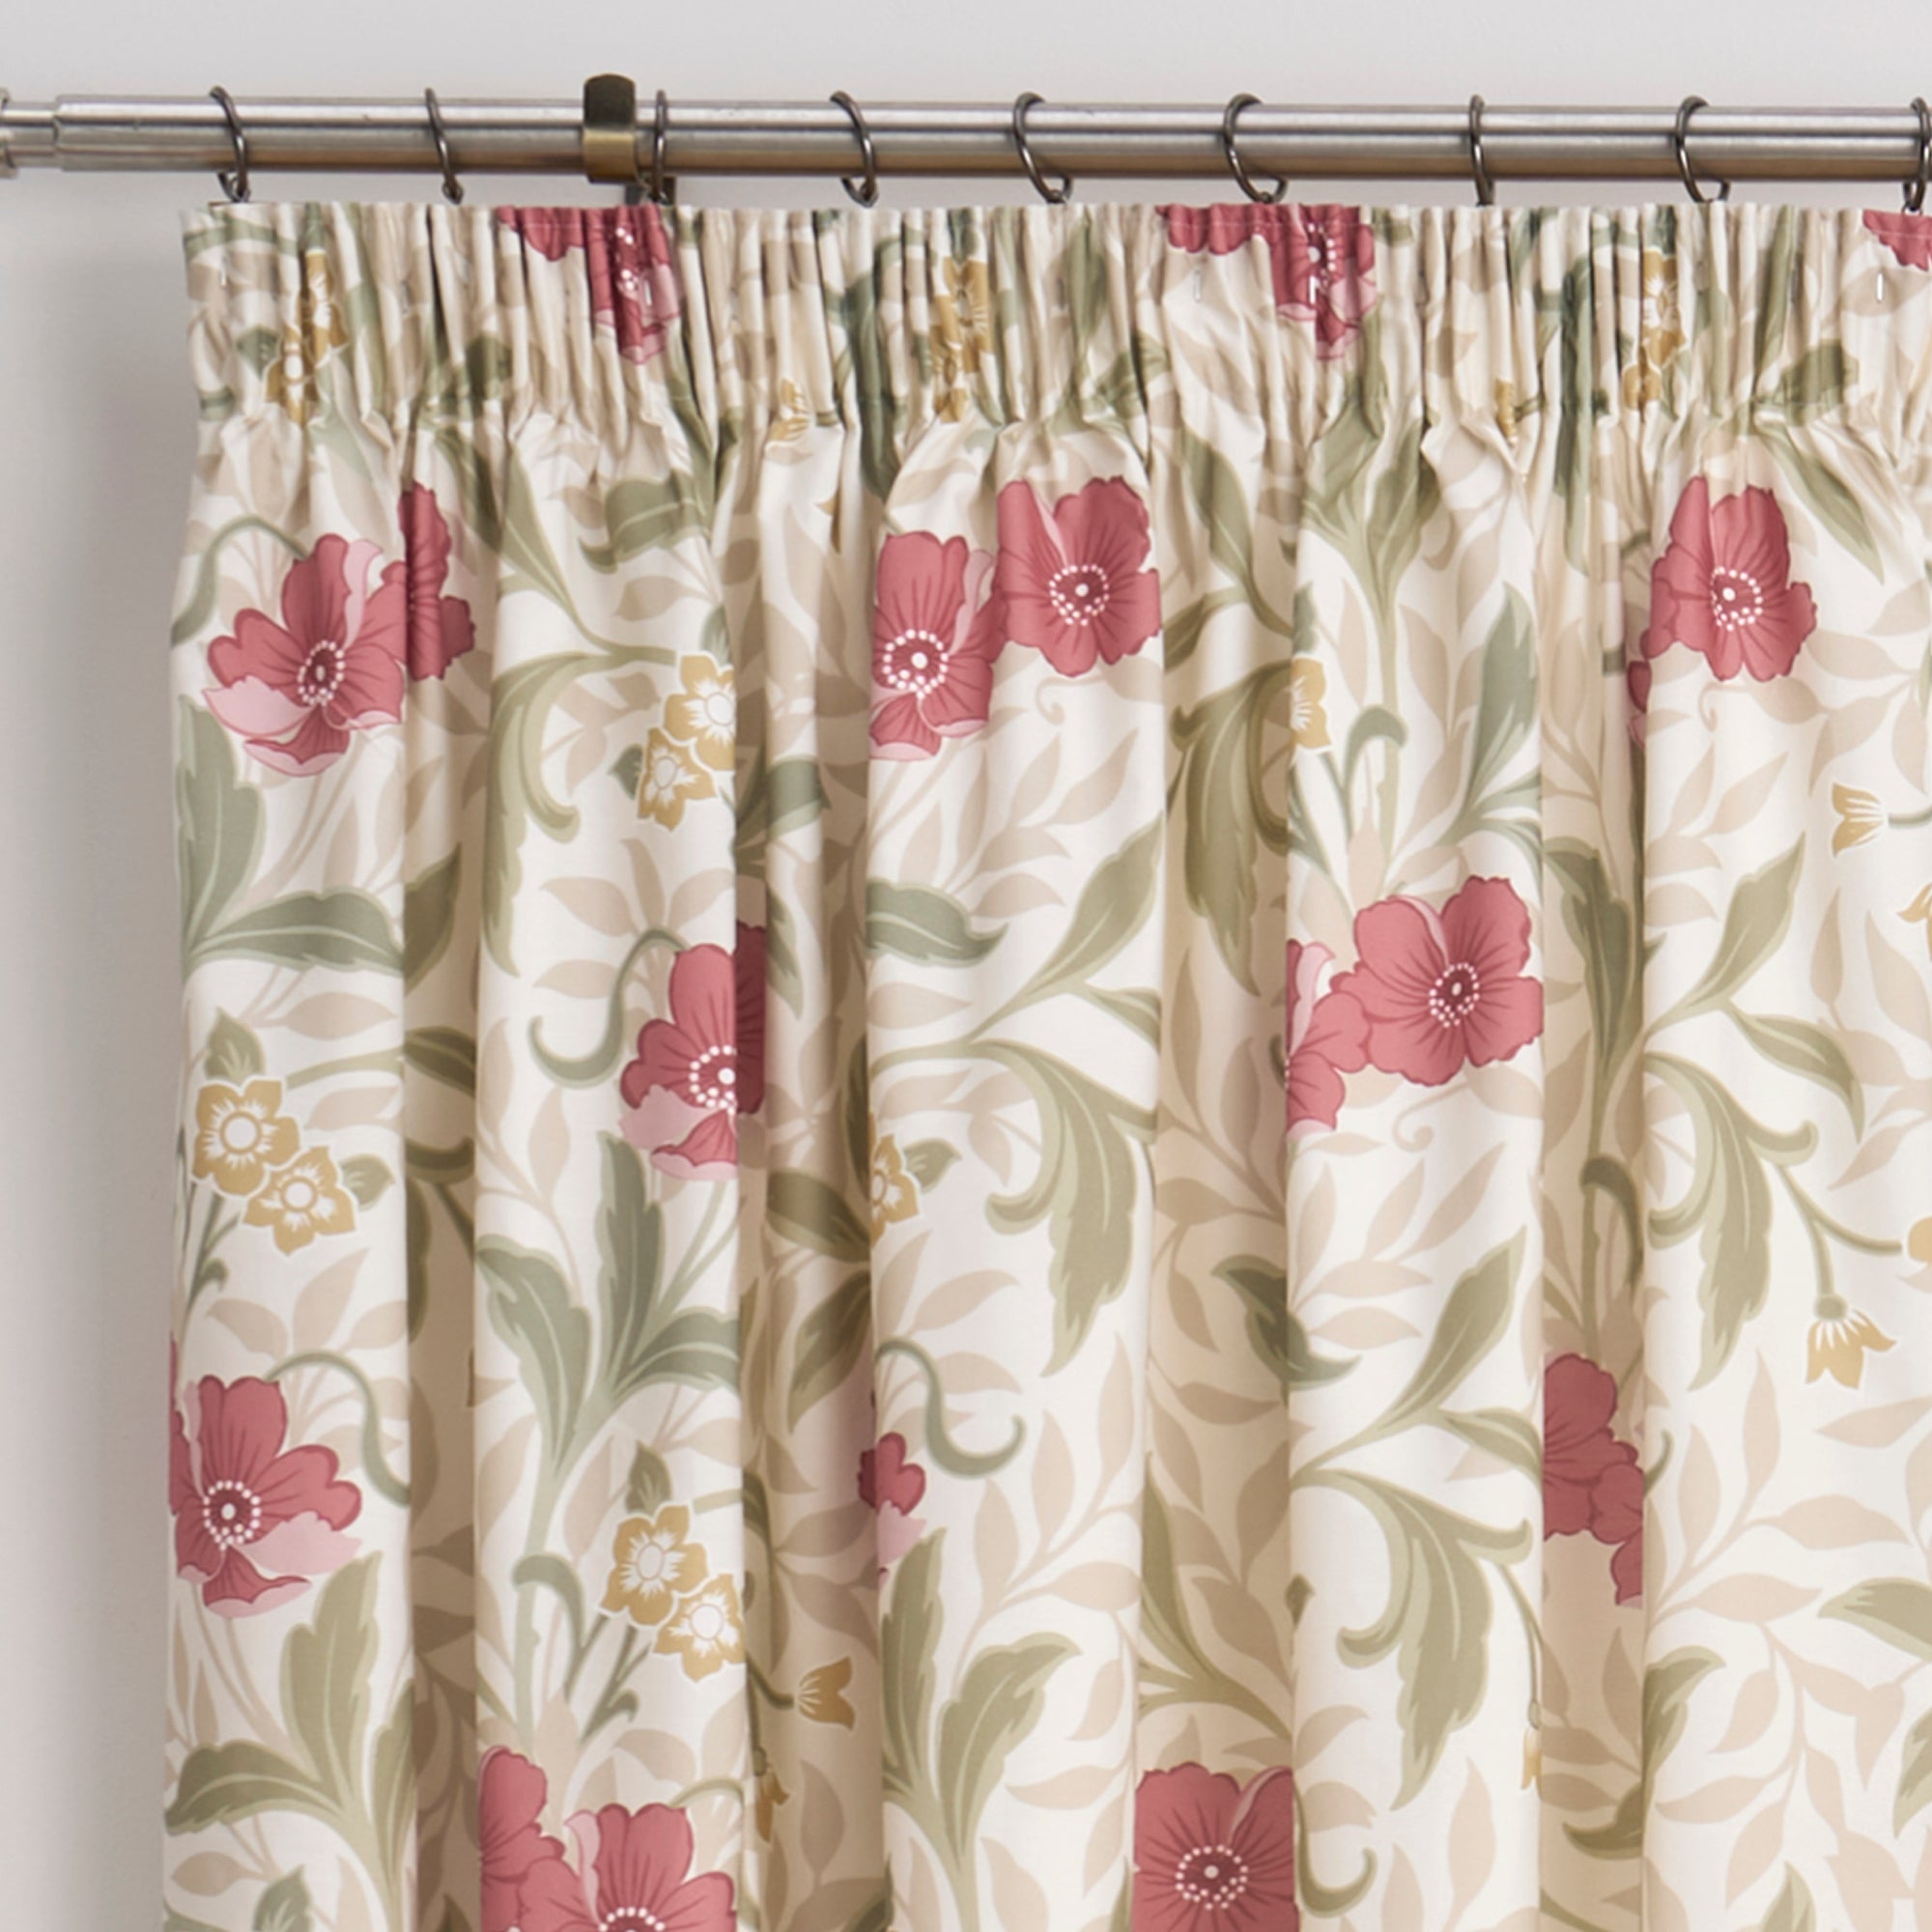 Pair of Pencil Pleat Curtains With Tie-Backs Sandringham by Dreams & Drapes Design in Red